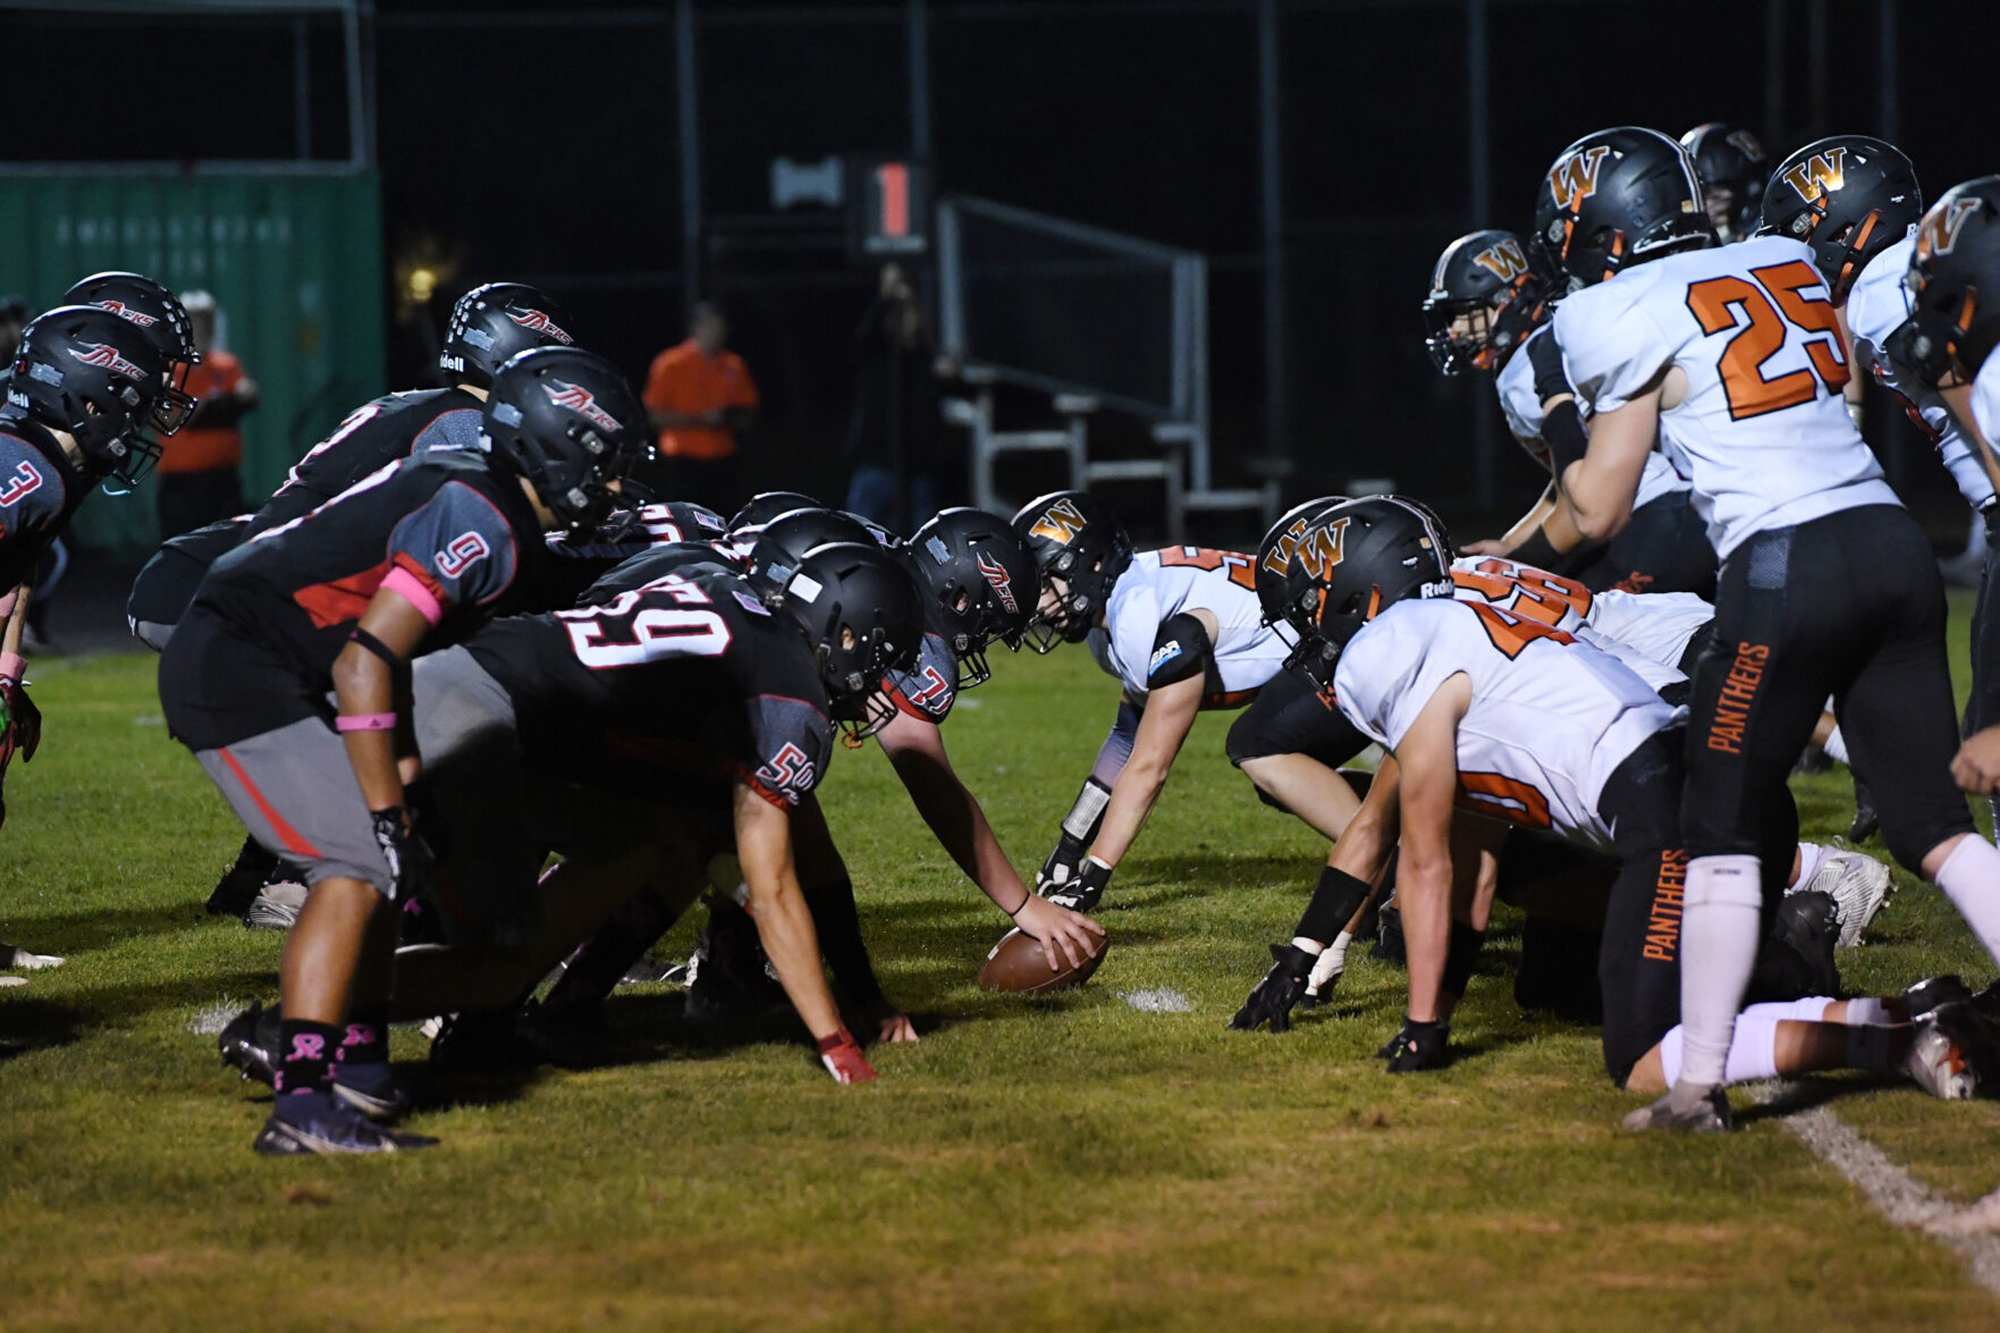 The defensive line of Washougal gets ready for the snap from R.A. Long during Friday’s 2A Greater St. Helens League game at Longview Memorial Stadium.